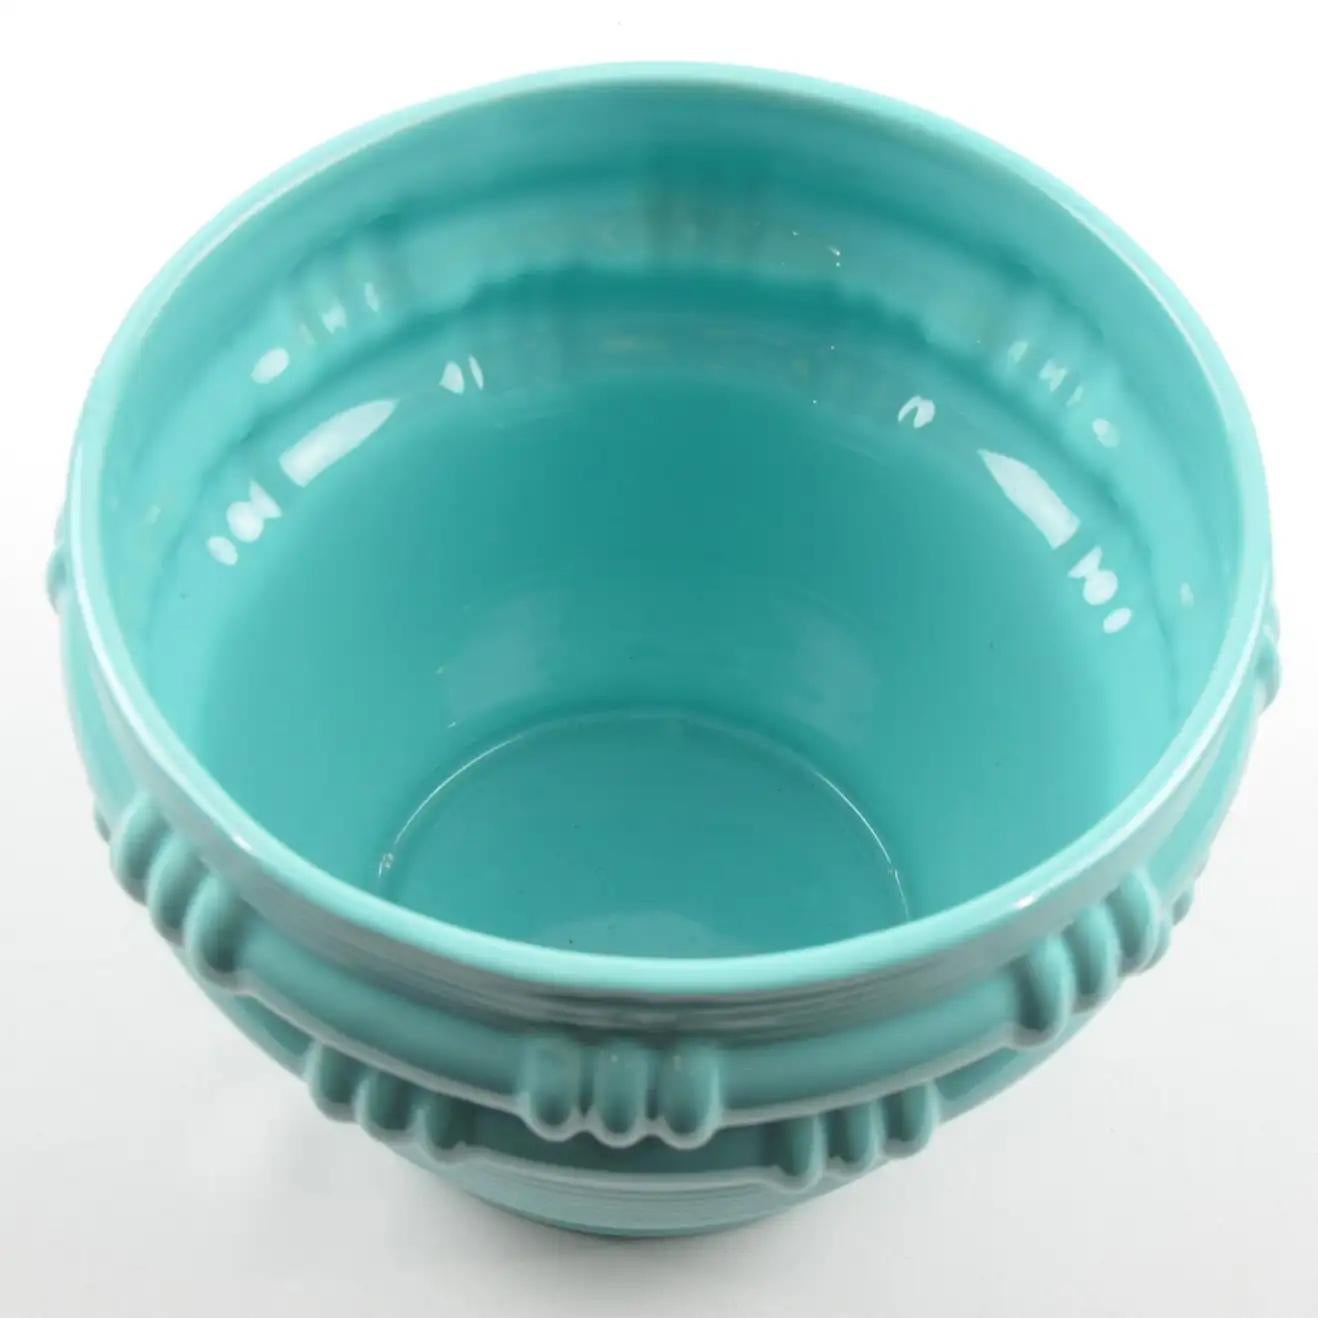 Blanche Letalle for Saint Clement Turquoise Ceramic Vase Planter, 1950s In Excellent Condition For Sale In Atlanta, GA